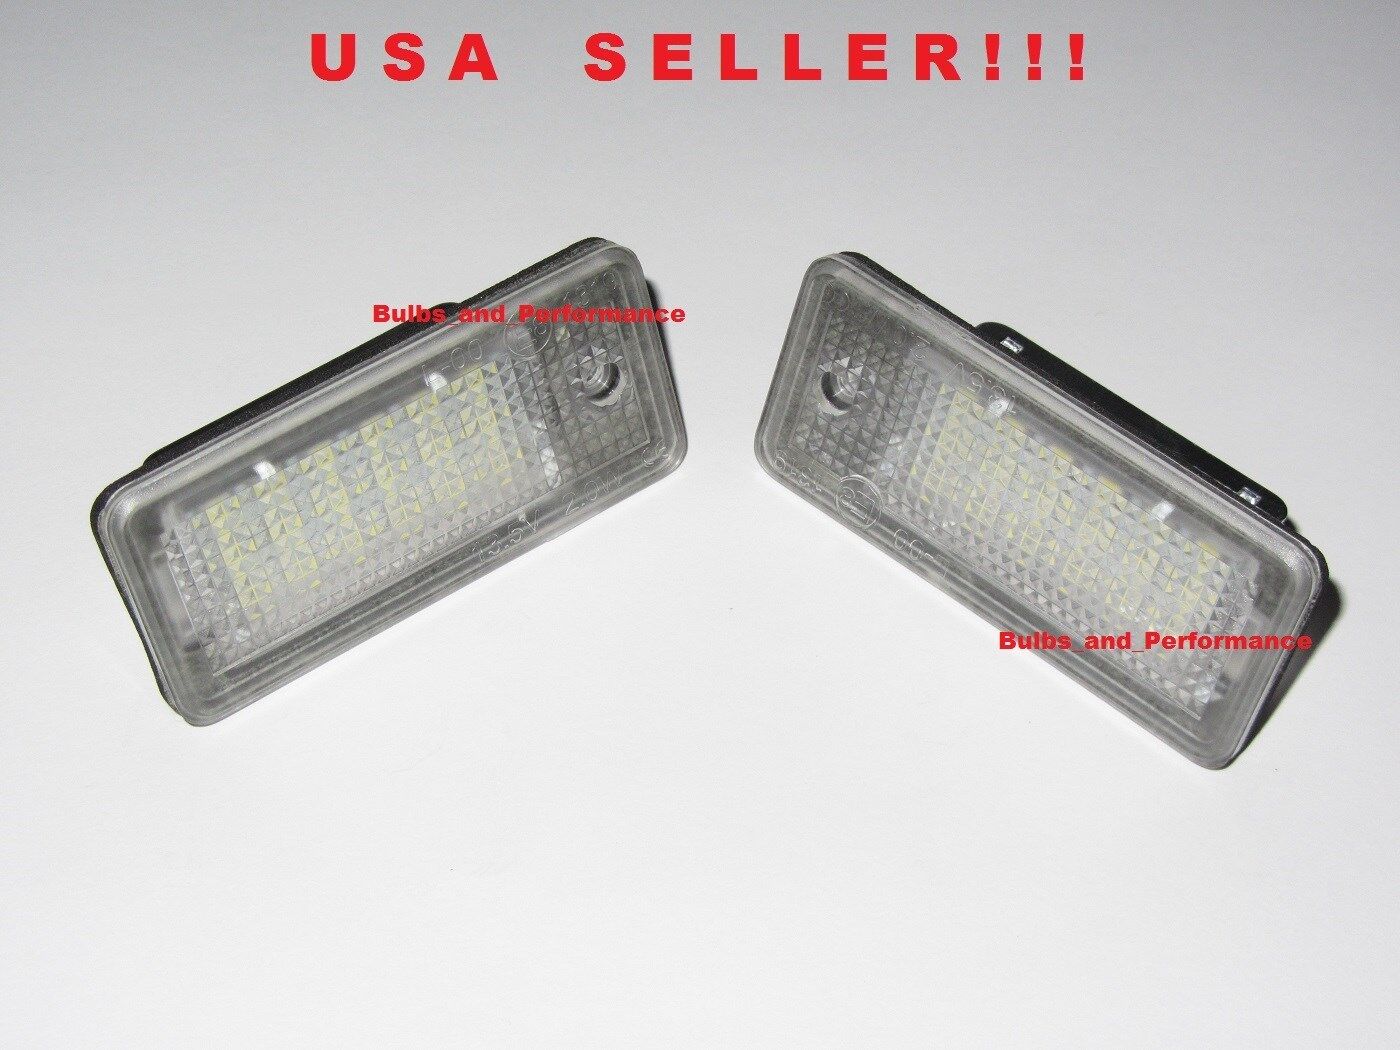 LED License Plate Lights For Audi A3 S3 A4 S4 RS4 (B6, B7) A6 A8 Q7 RS6 Audi NEW